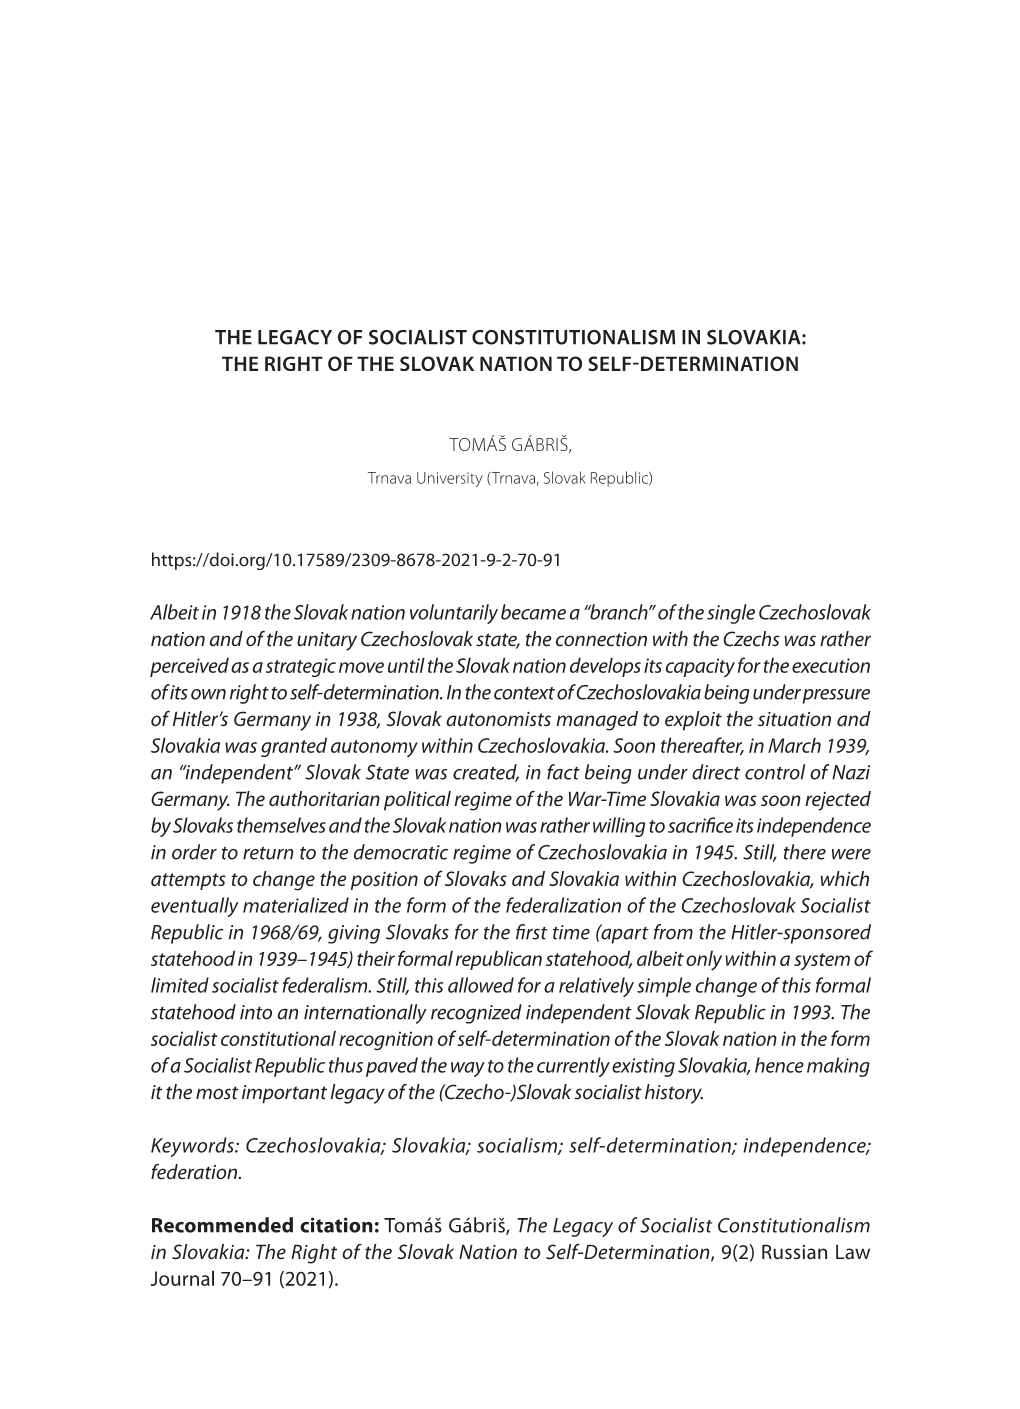 The Legacy of Socialist Constitutionalism in Slovakia: the Right of the Slovak Nation to Self-Determination